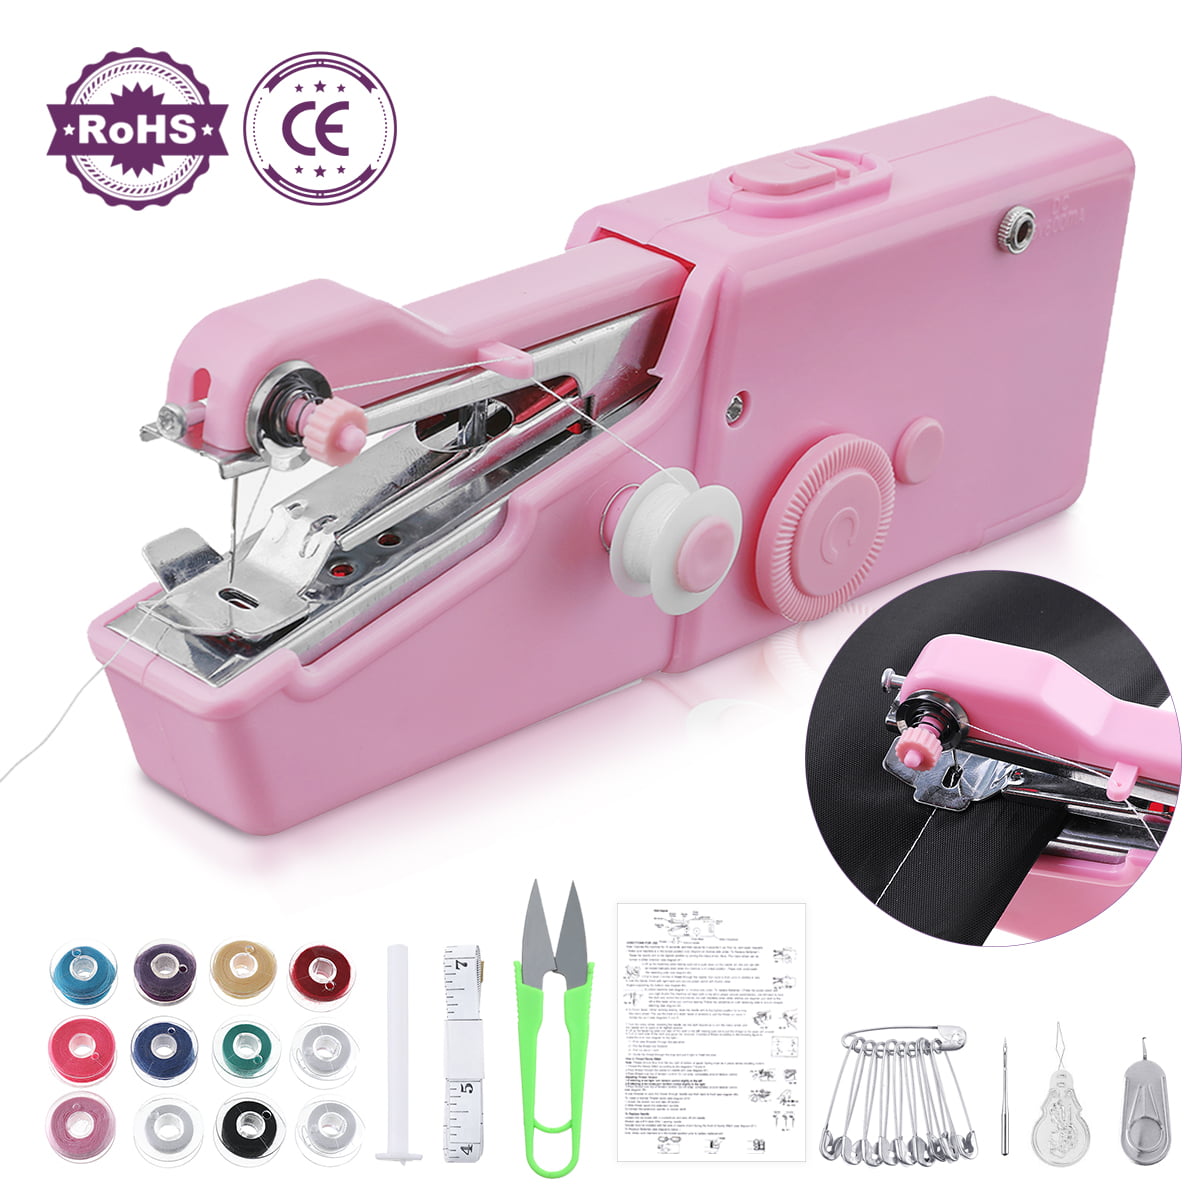 NEW MINI ELECTRIC HAND HELD PORTABLE SEWING MACHINE STITCH CORDLESS TRAVEL CRAFT 